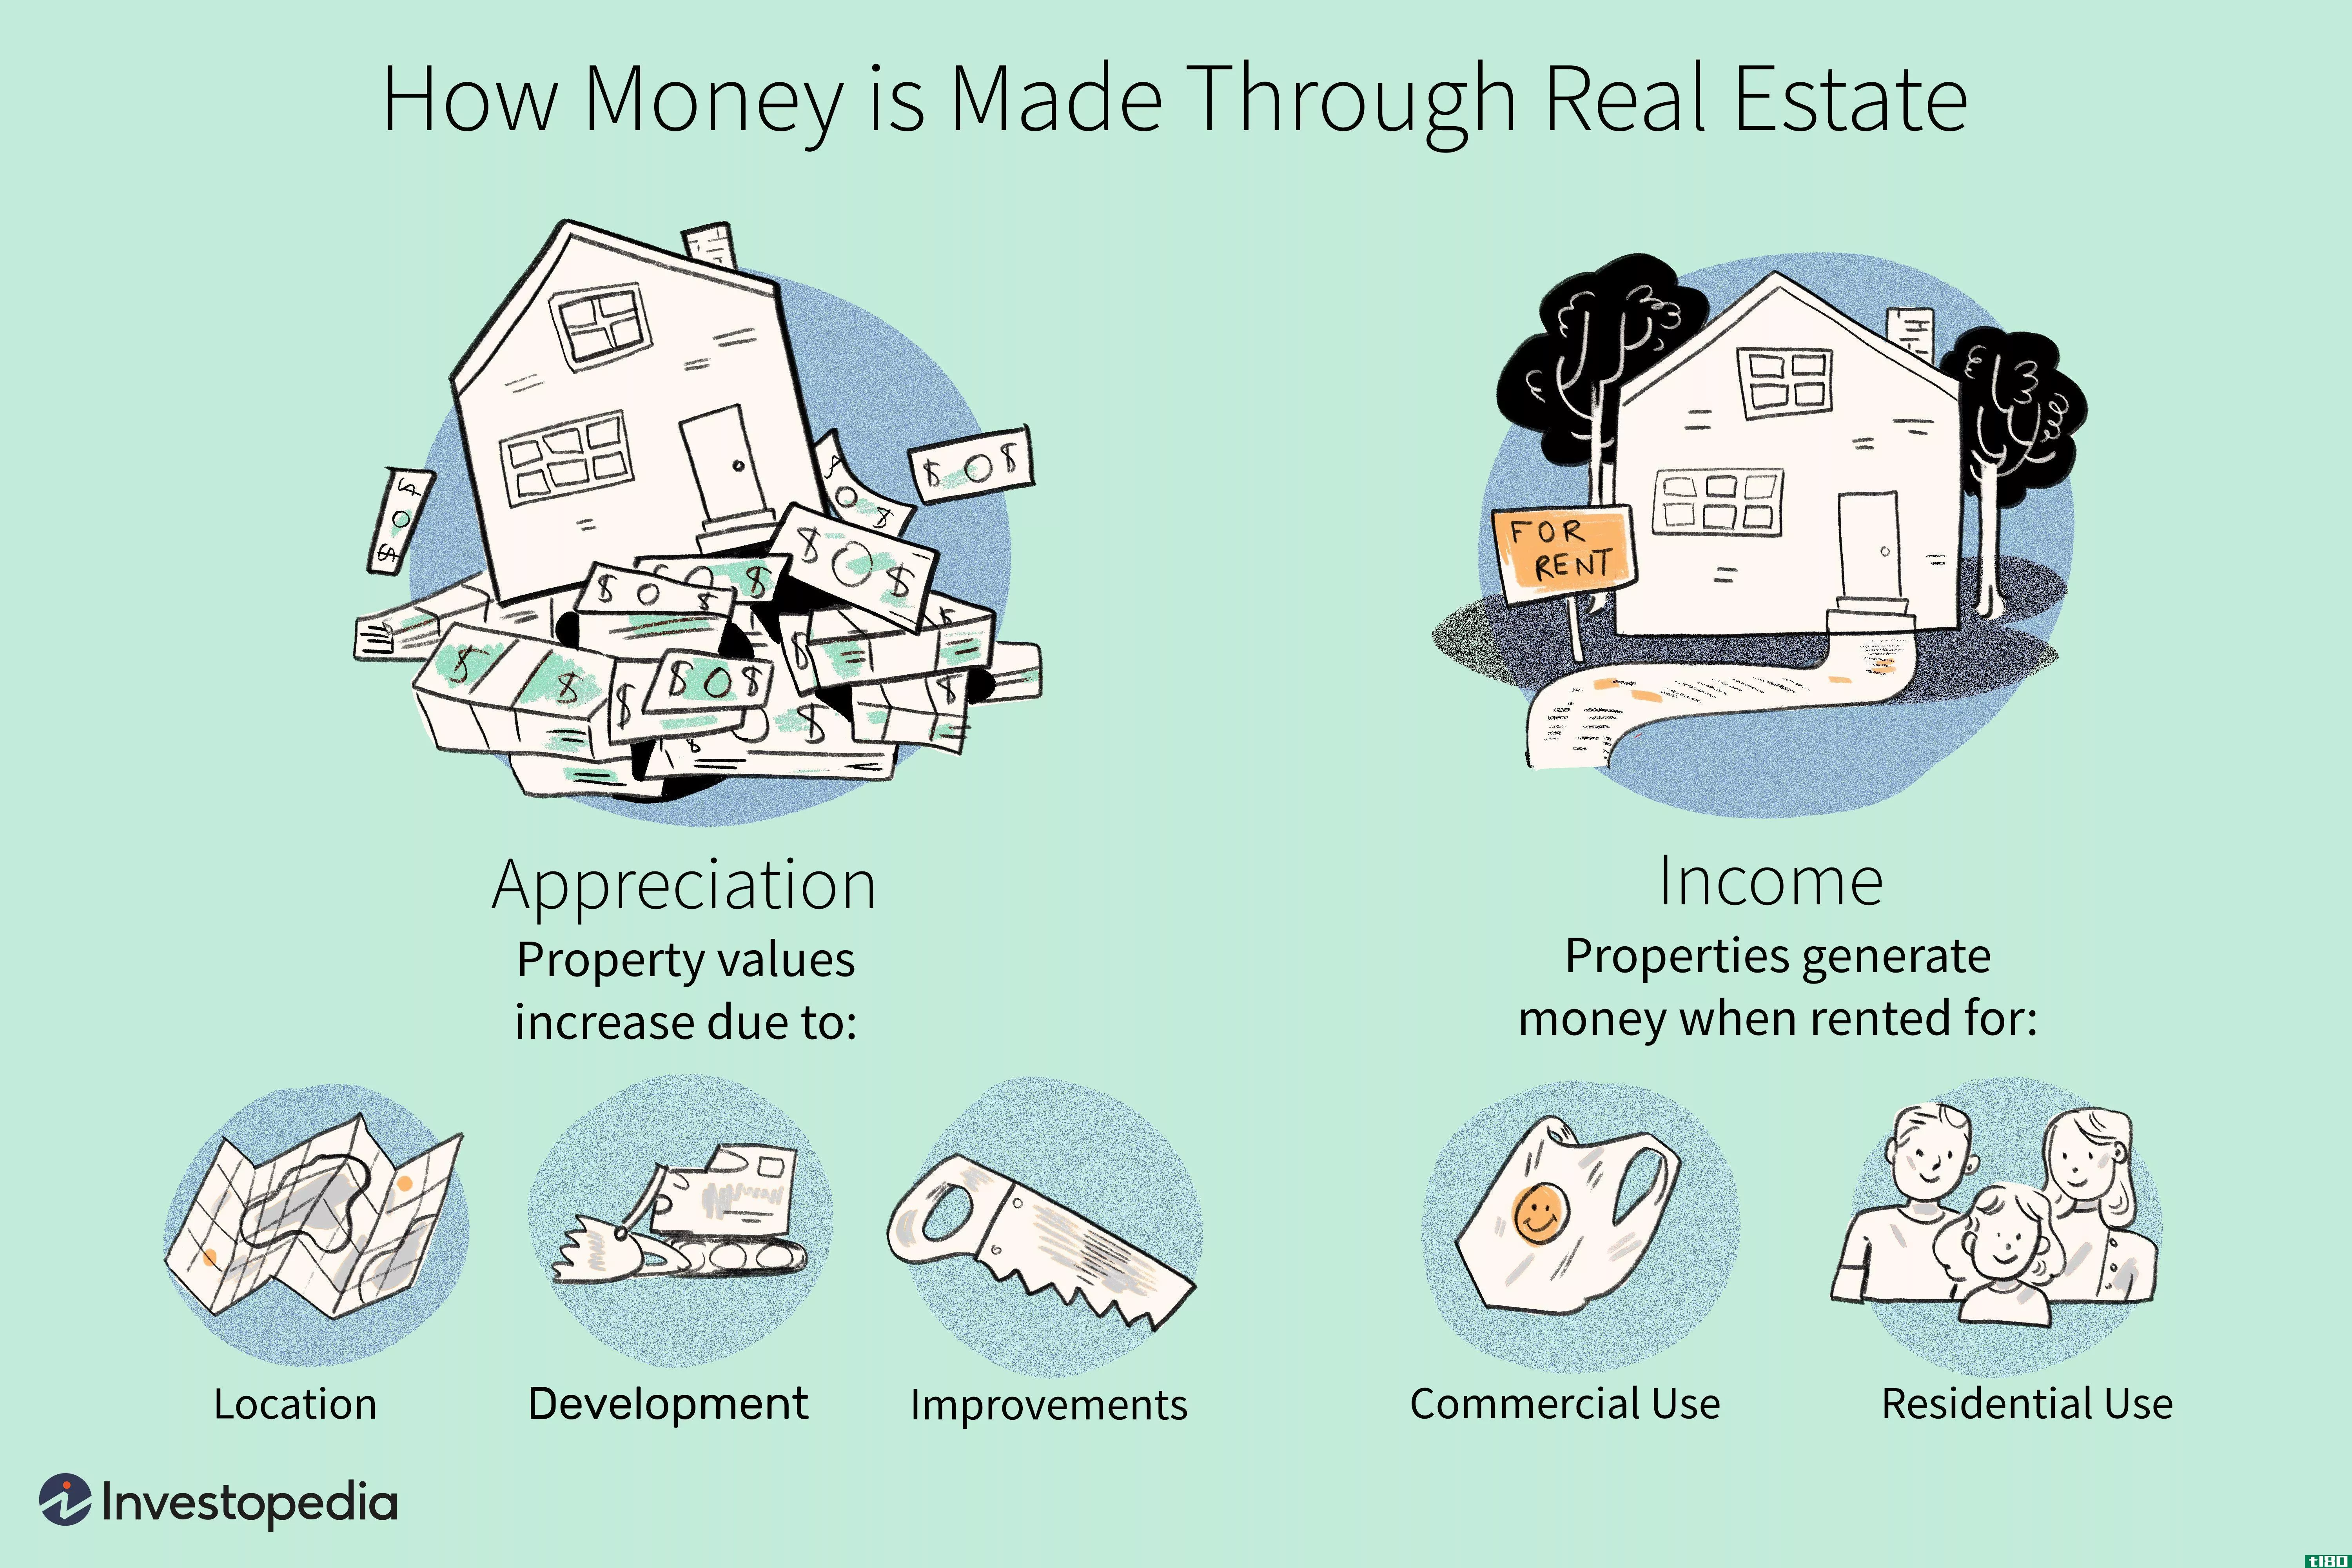 How Money is Made Through Real Estate